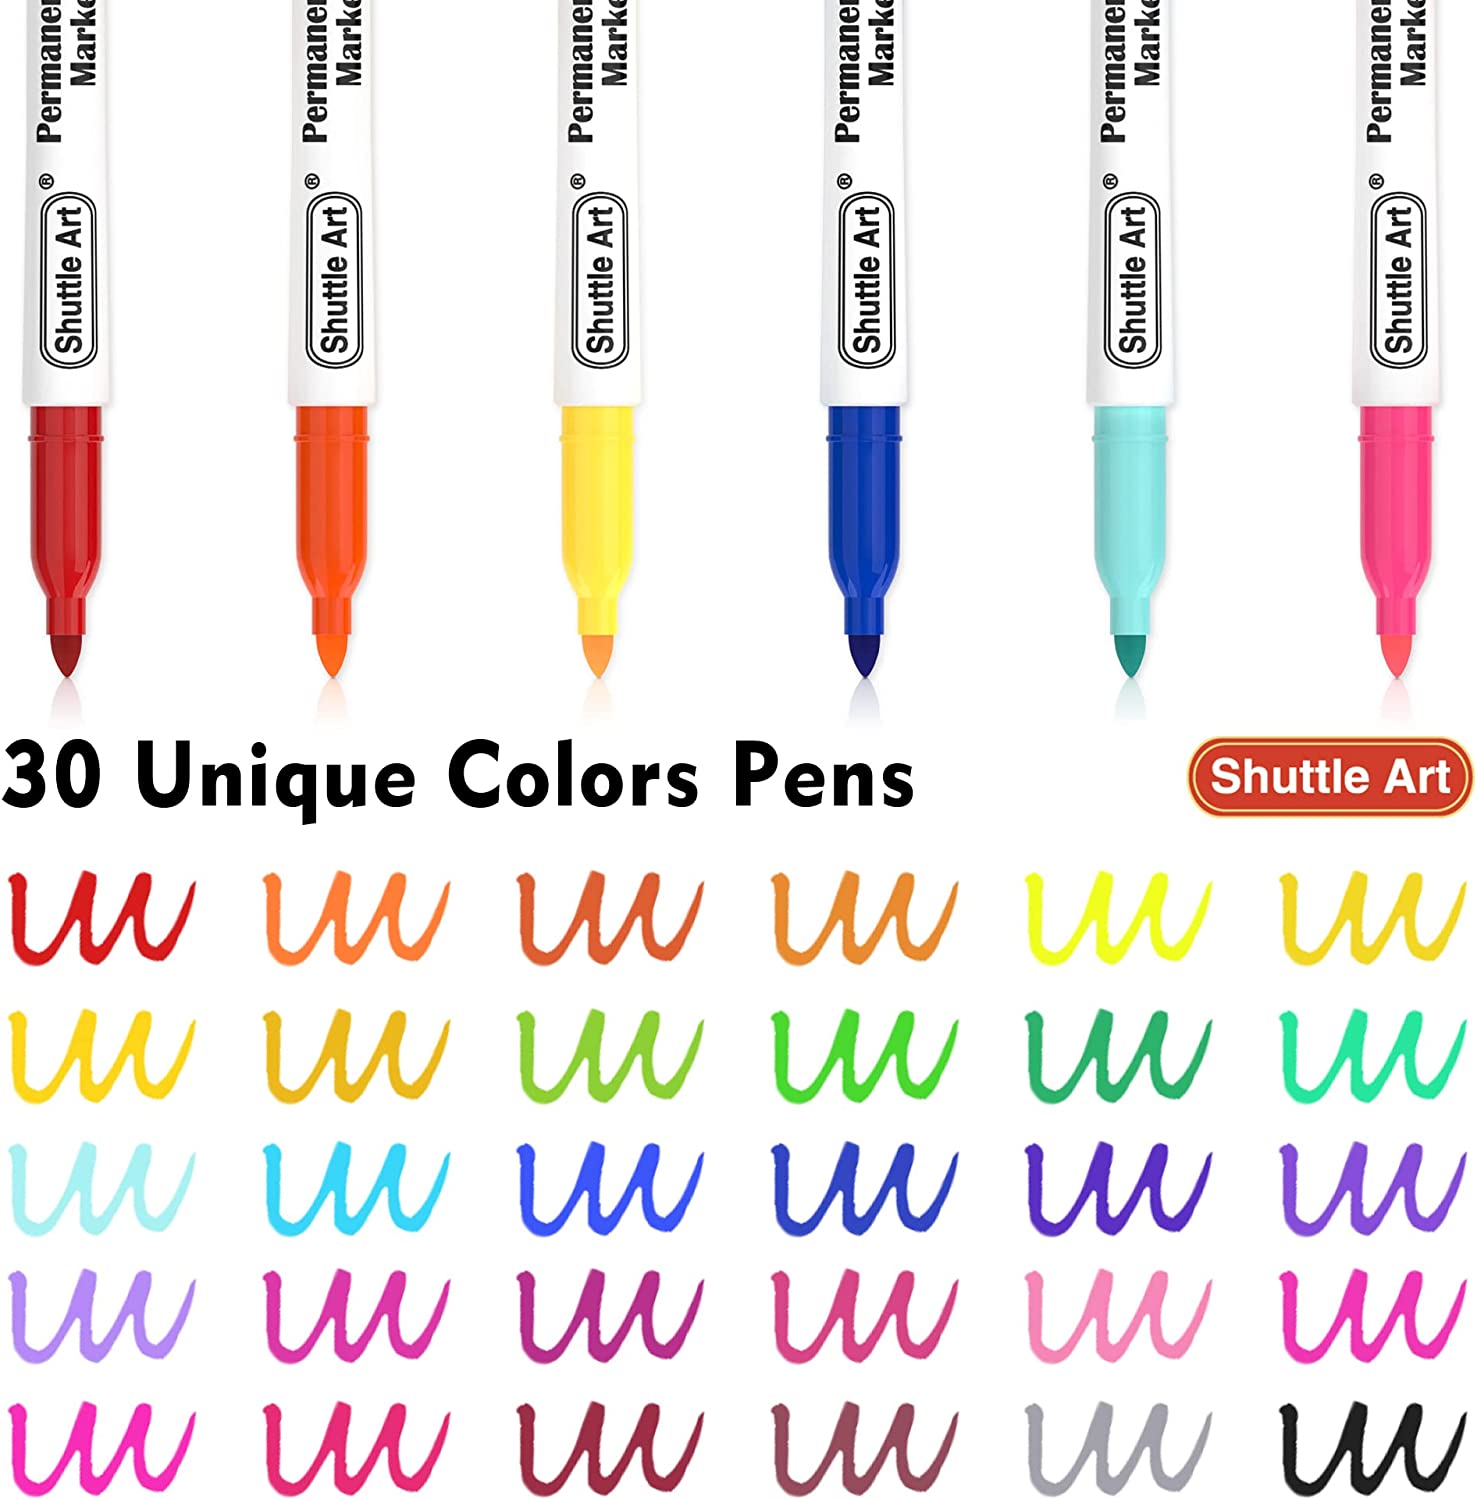 Shuttle Art Permanent Markers shades